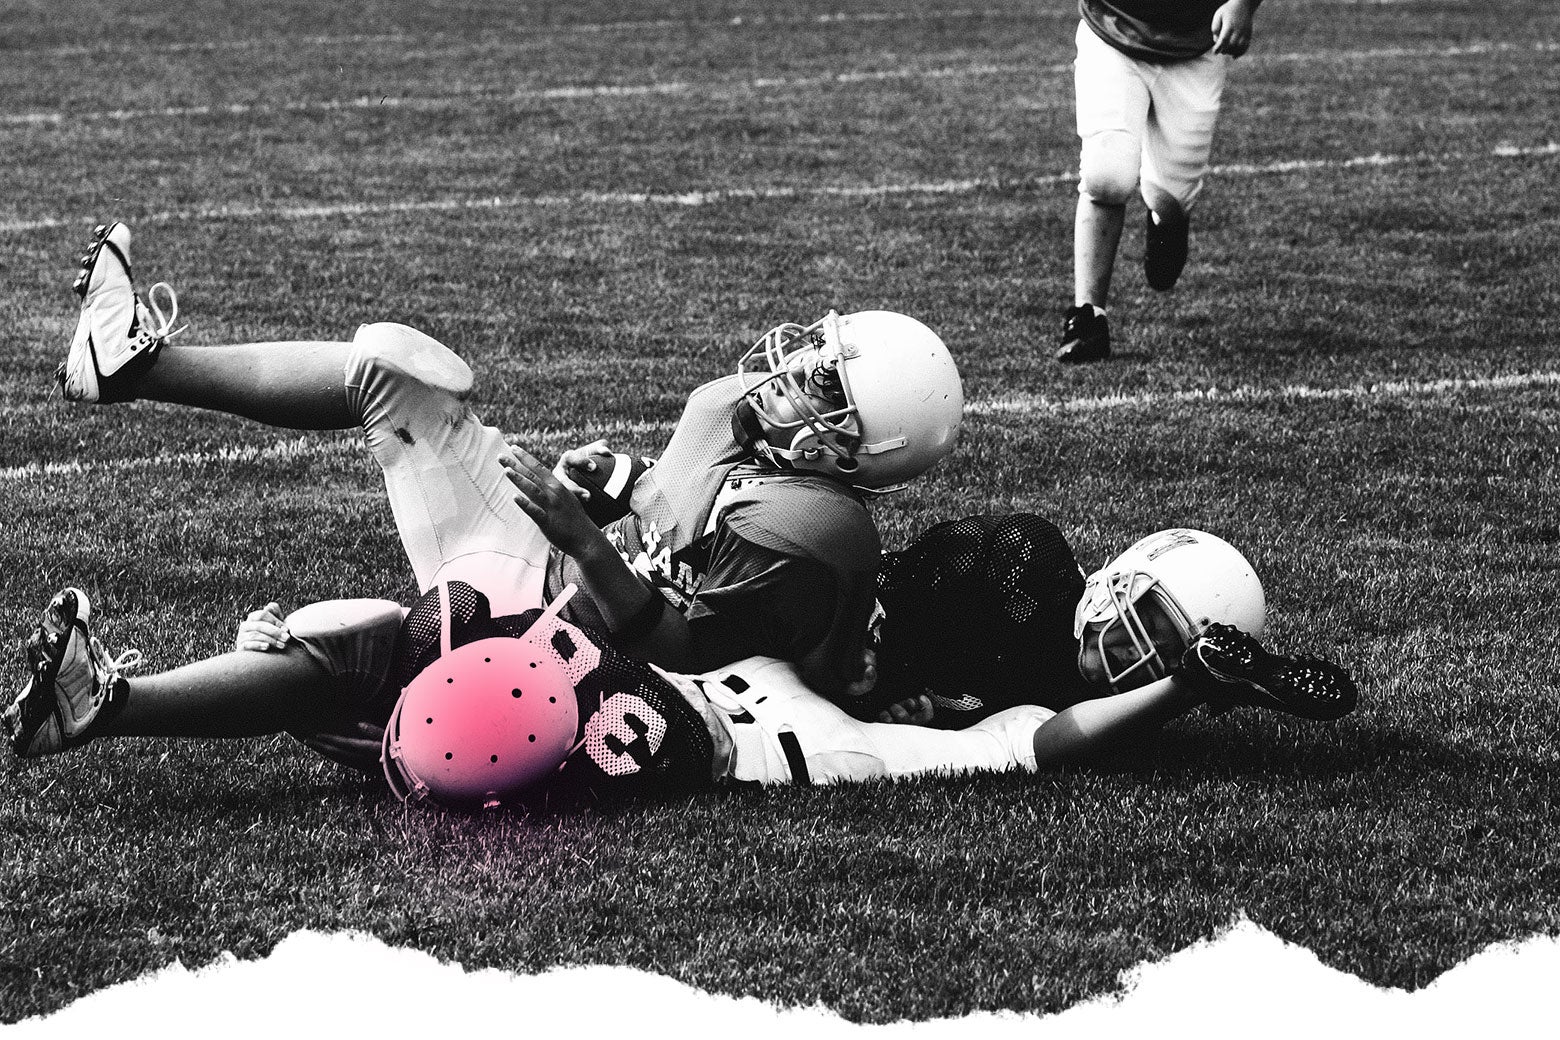 Photo illustration: A football player lies on the ground with his helmet highlighted to suggest a possible concussion.